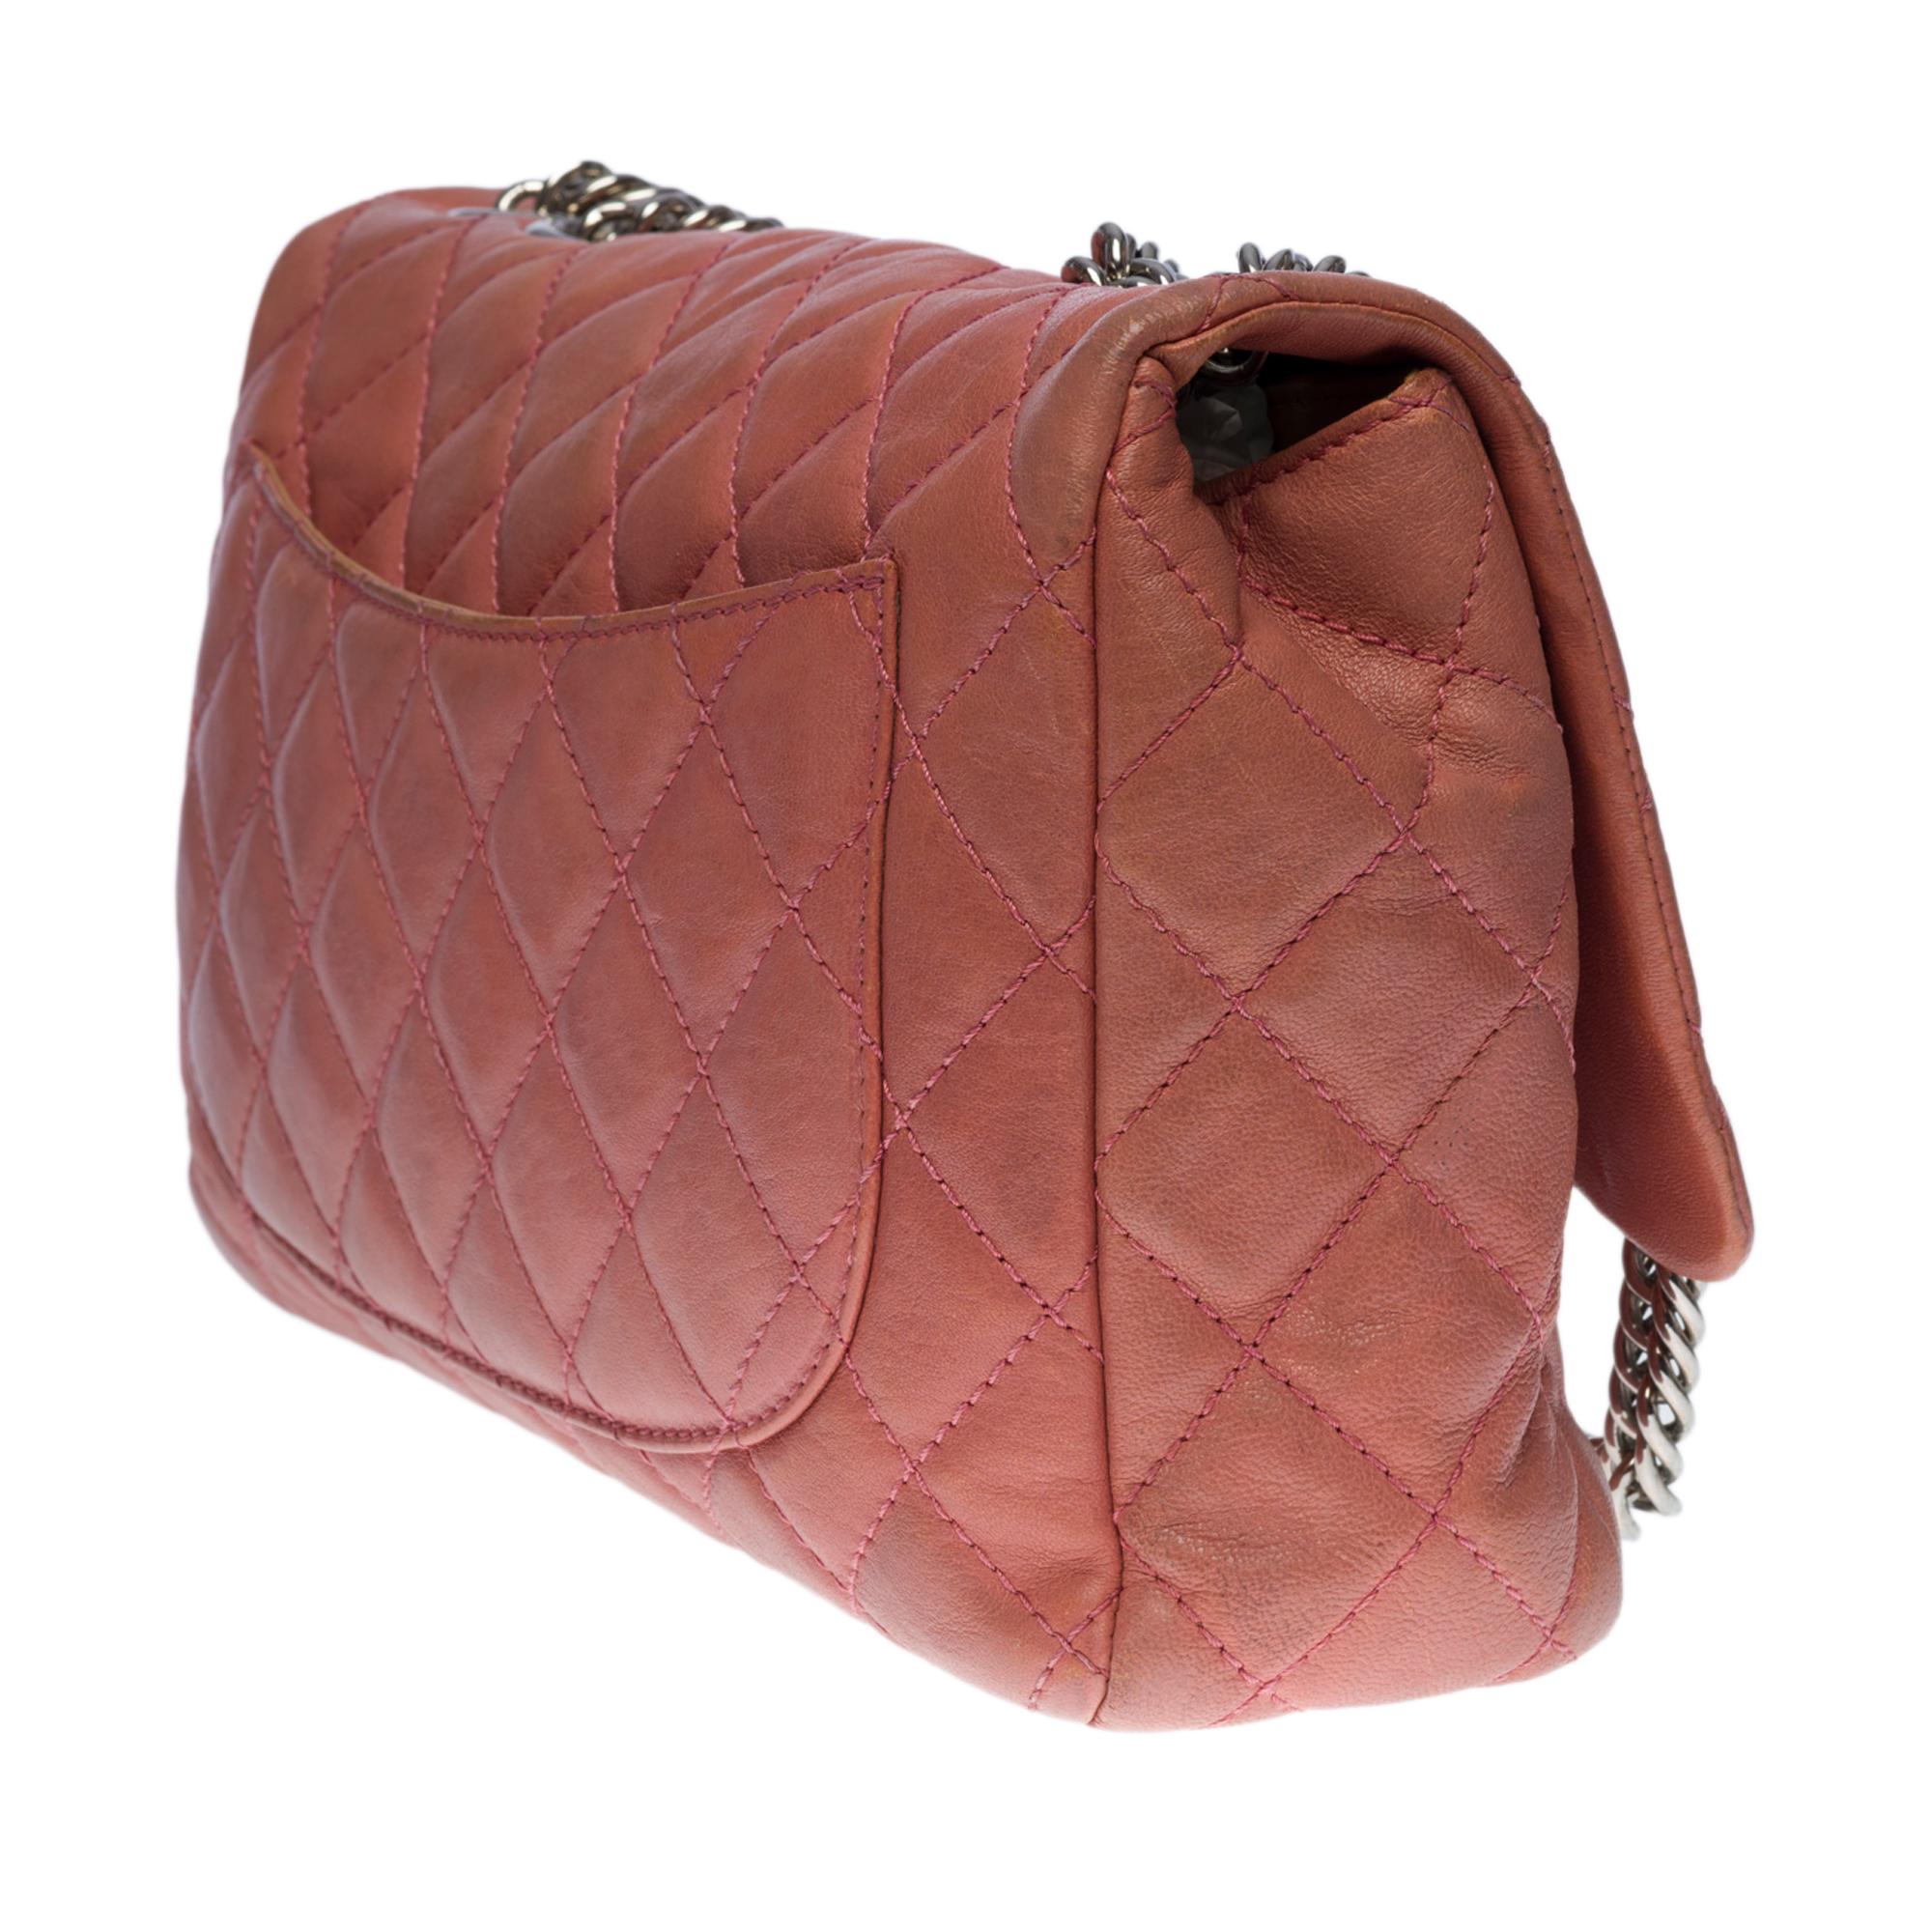 Women's  The Chanel Timeless/Classique Jumbo single flap bag handbag in powder pink aged For Sale